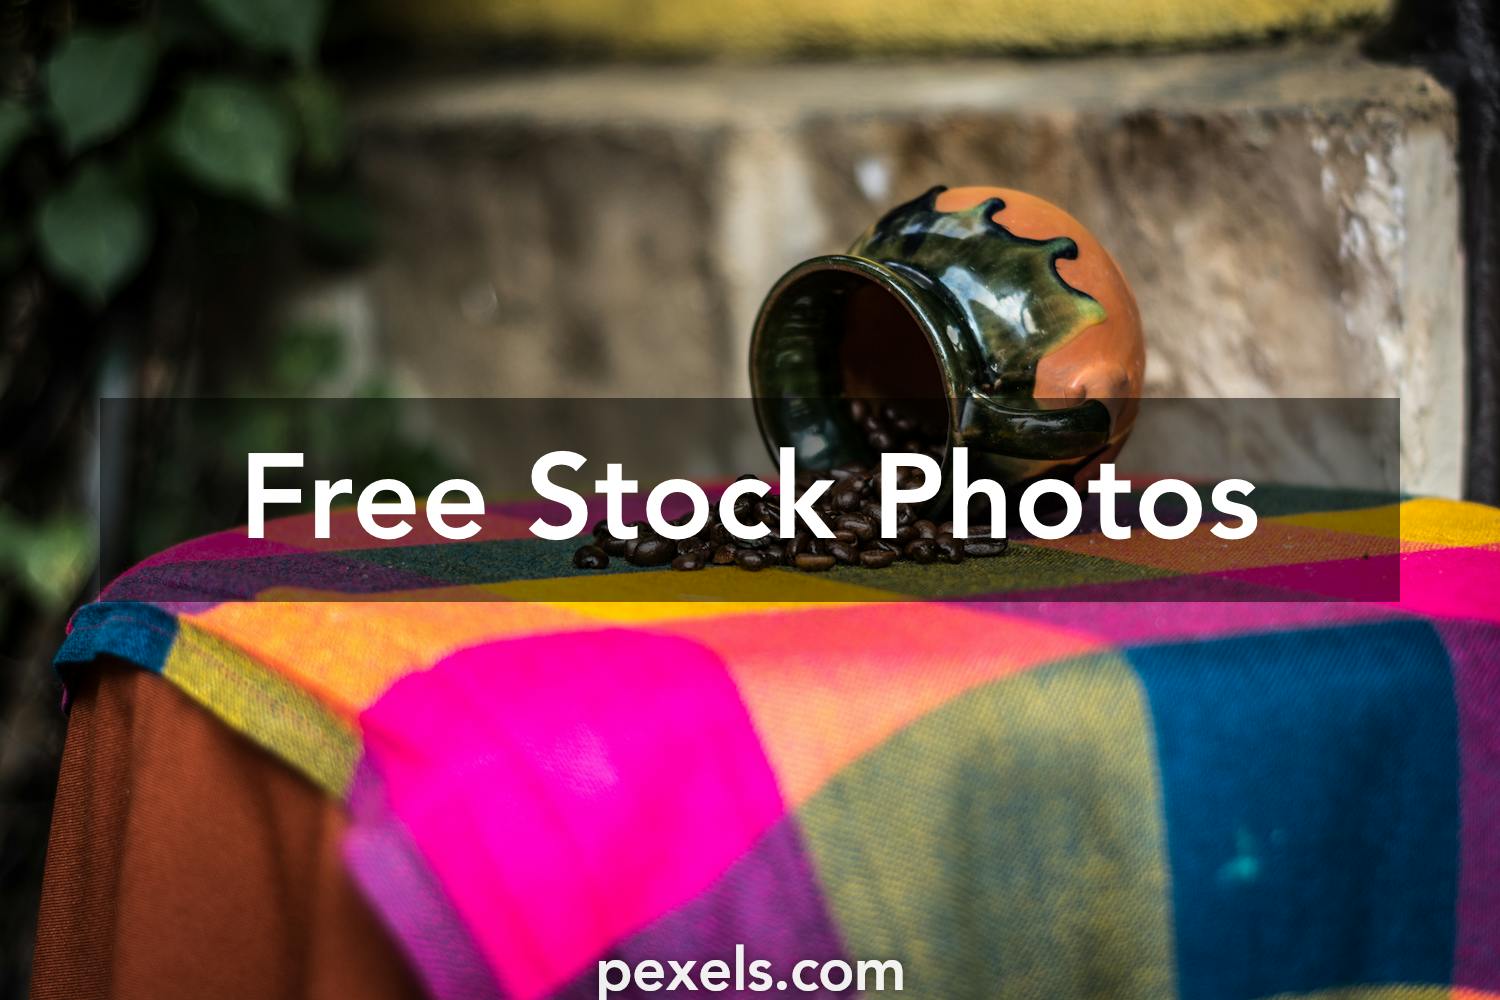 Mexican Photos, Download The BEST Free Mexican Stock Photos & HD Images